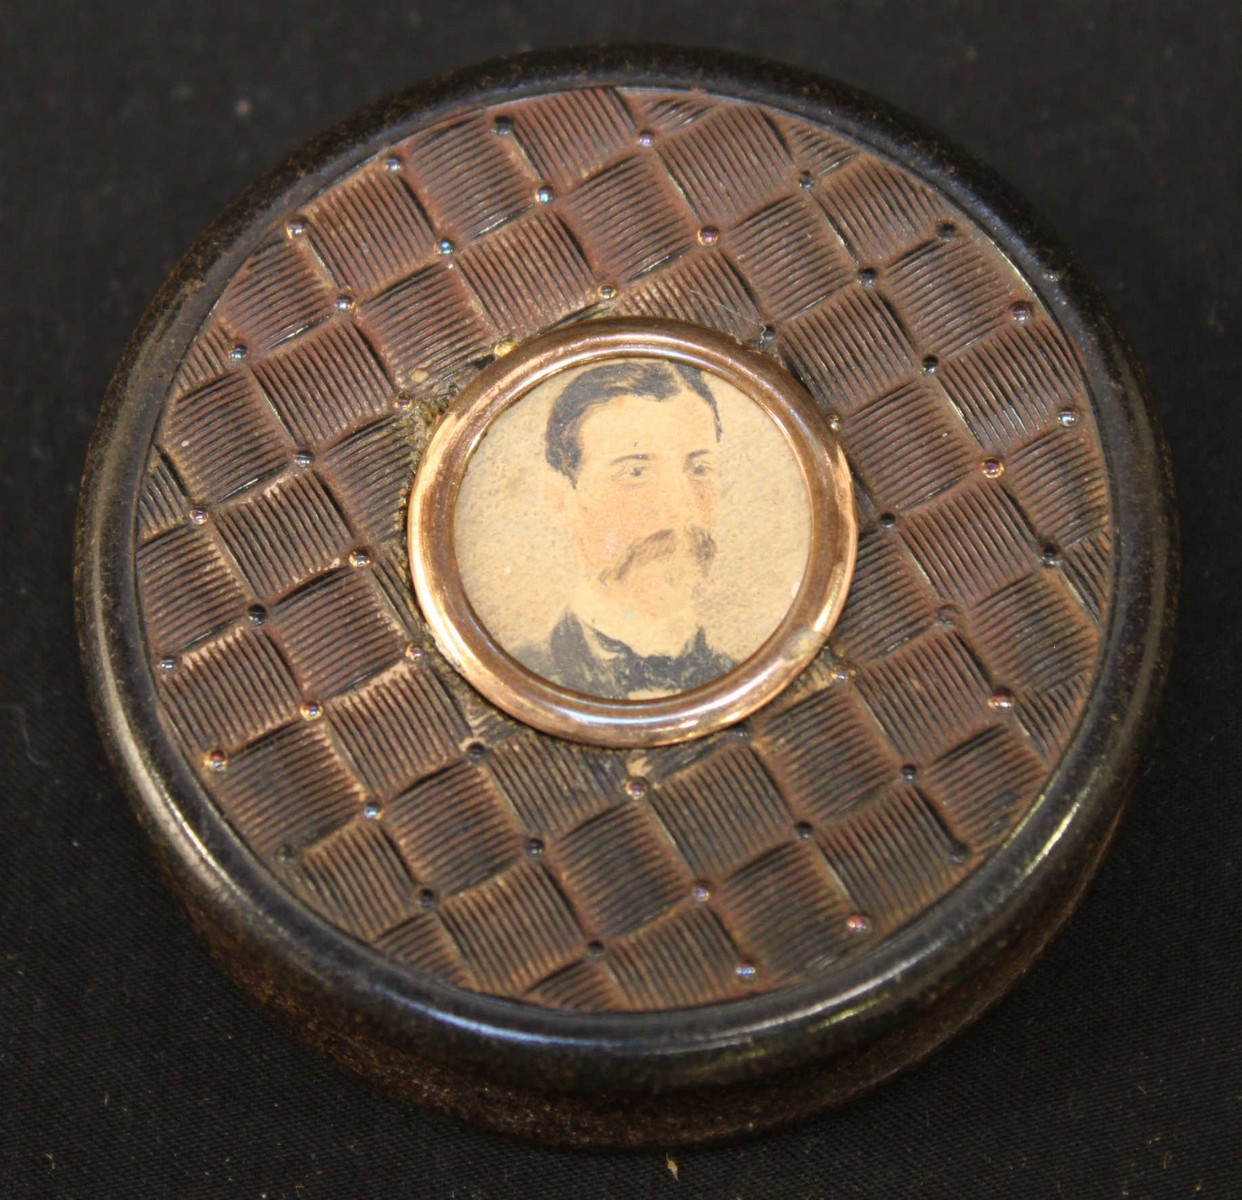 A 19th century tortoiseshell circular pill box, the lid inset with a small watercolour portrait of a